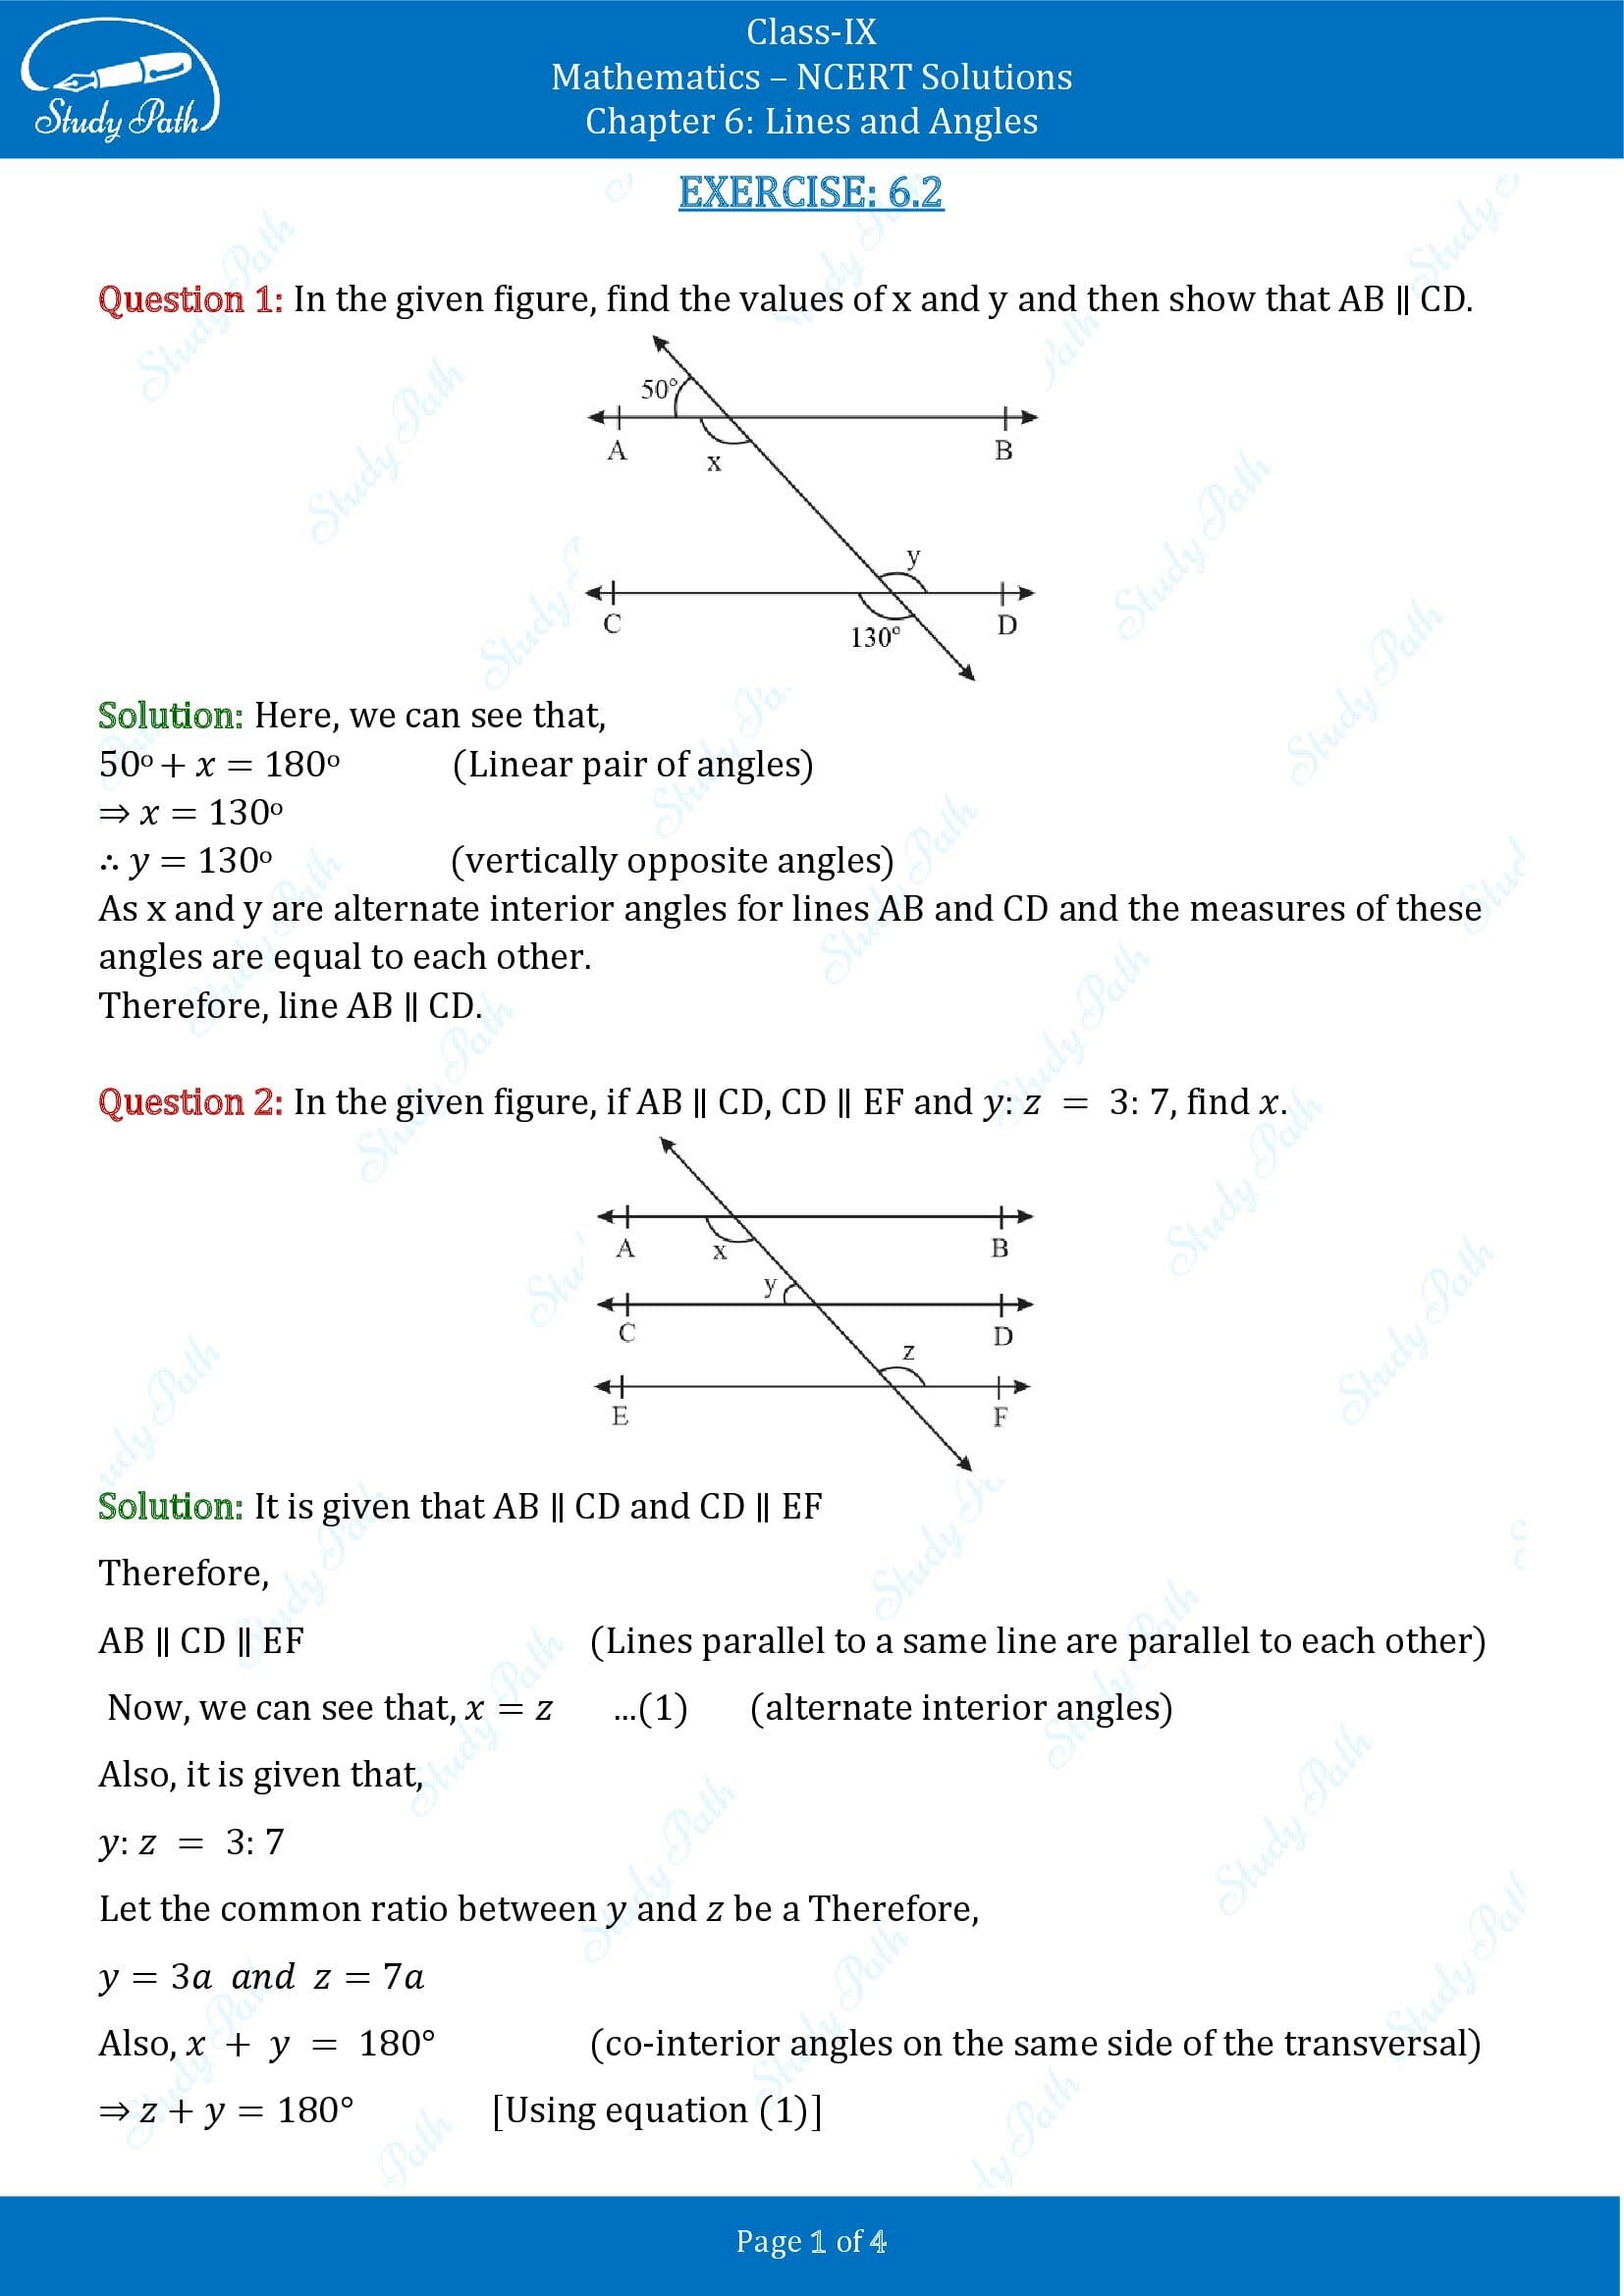 NCERT Solutions for Class 9 Maths Chapter 6 Lines and Angles Exercise 6.2 00001